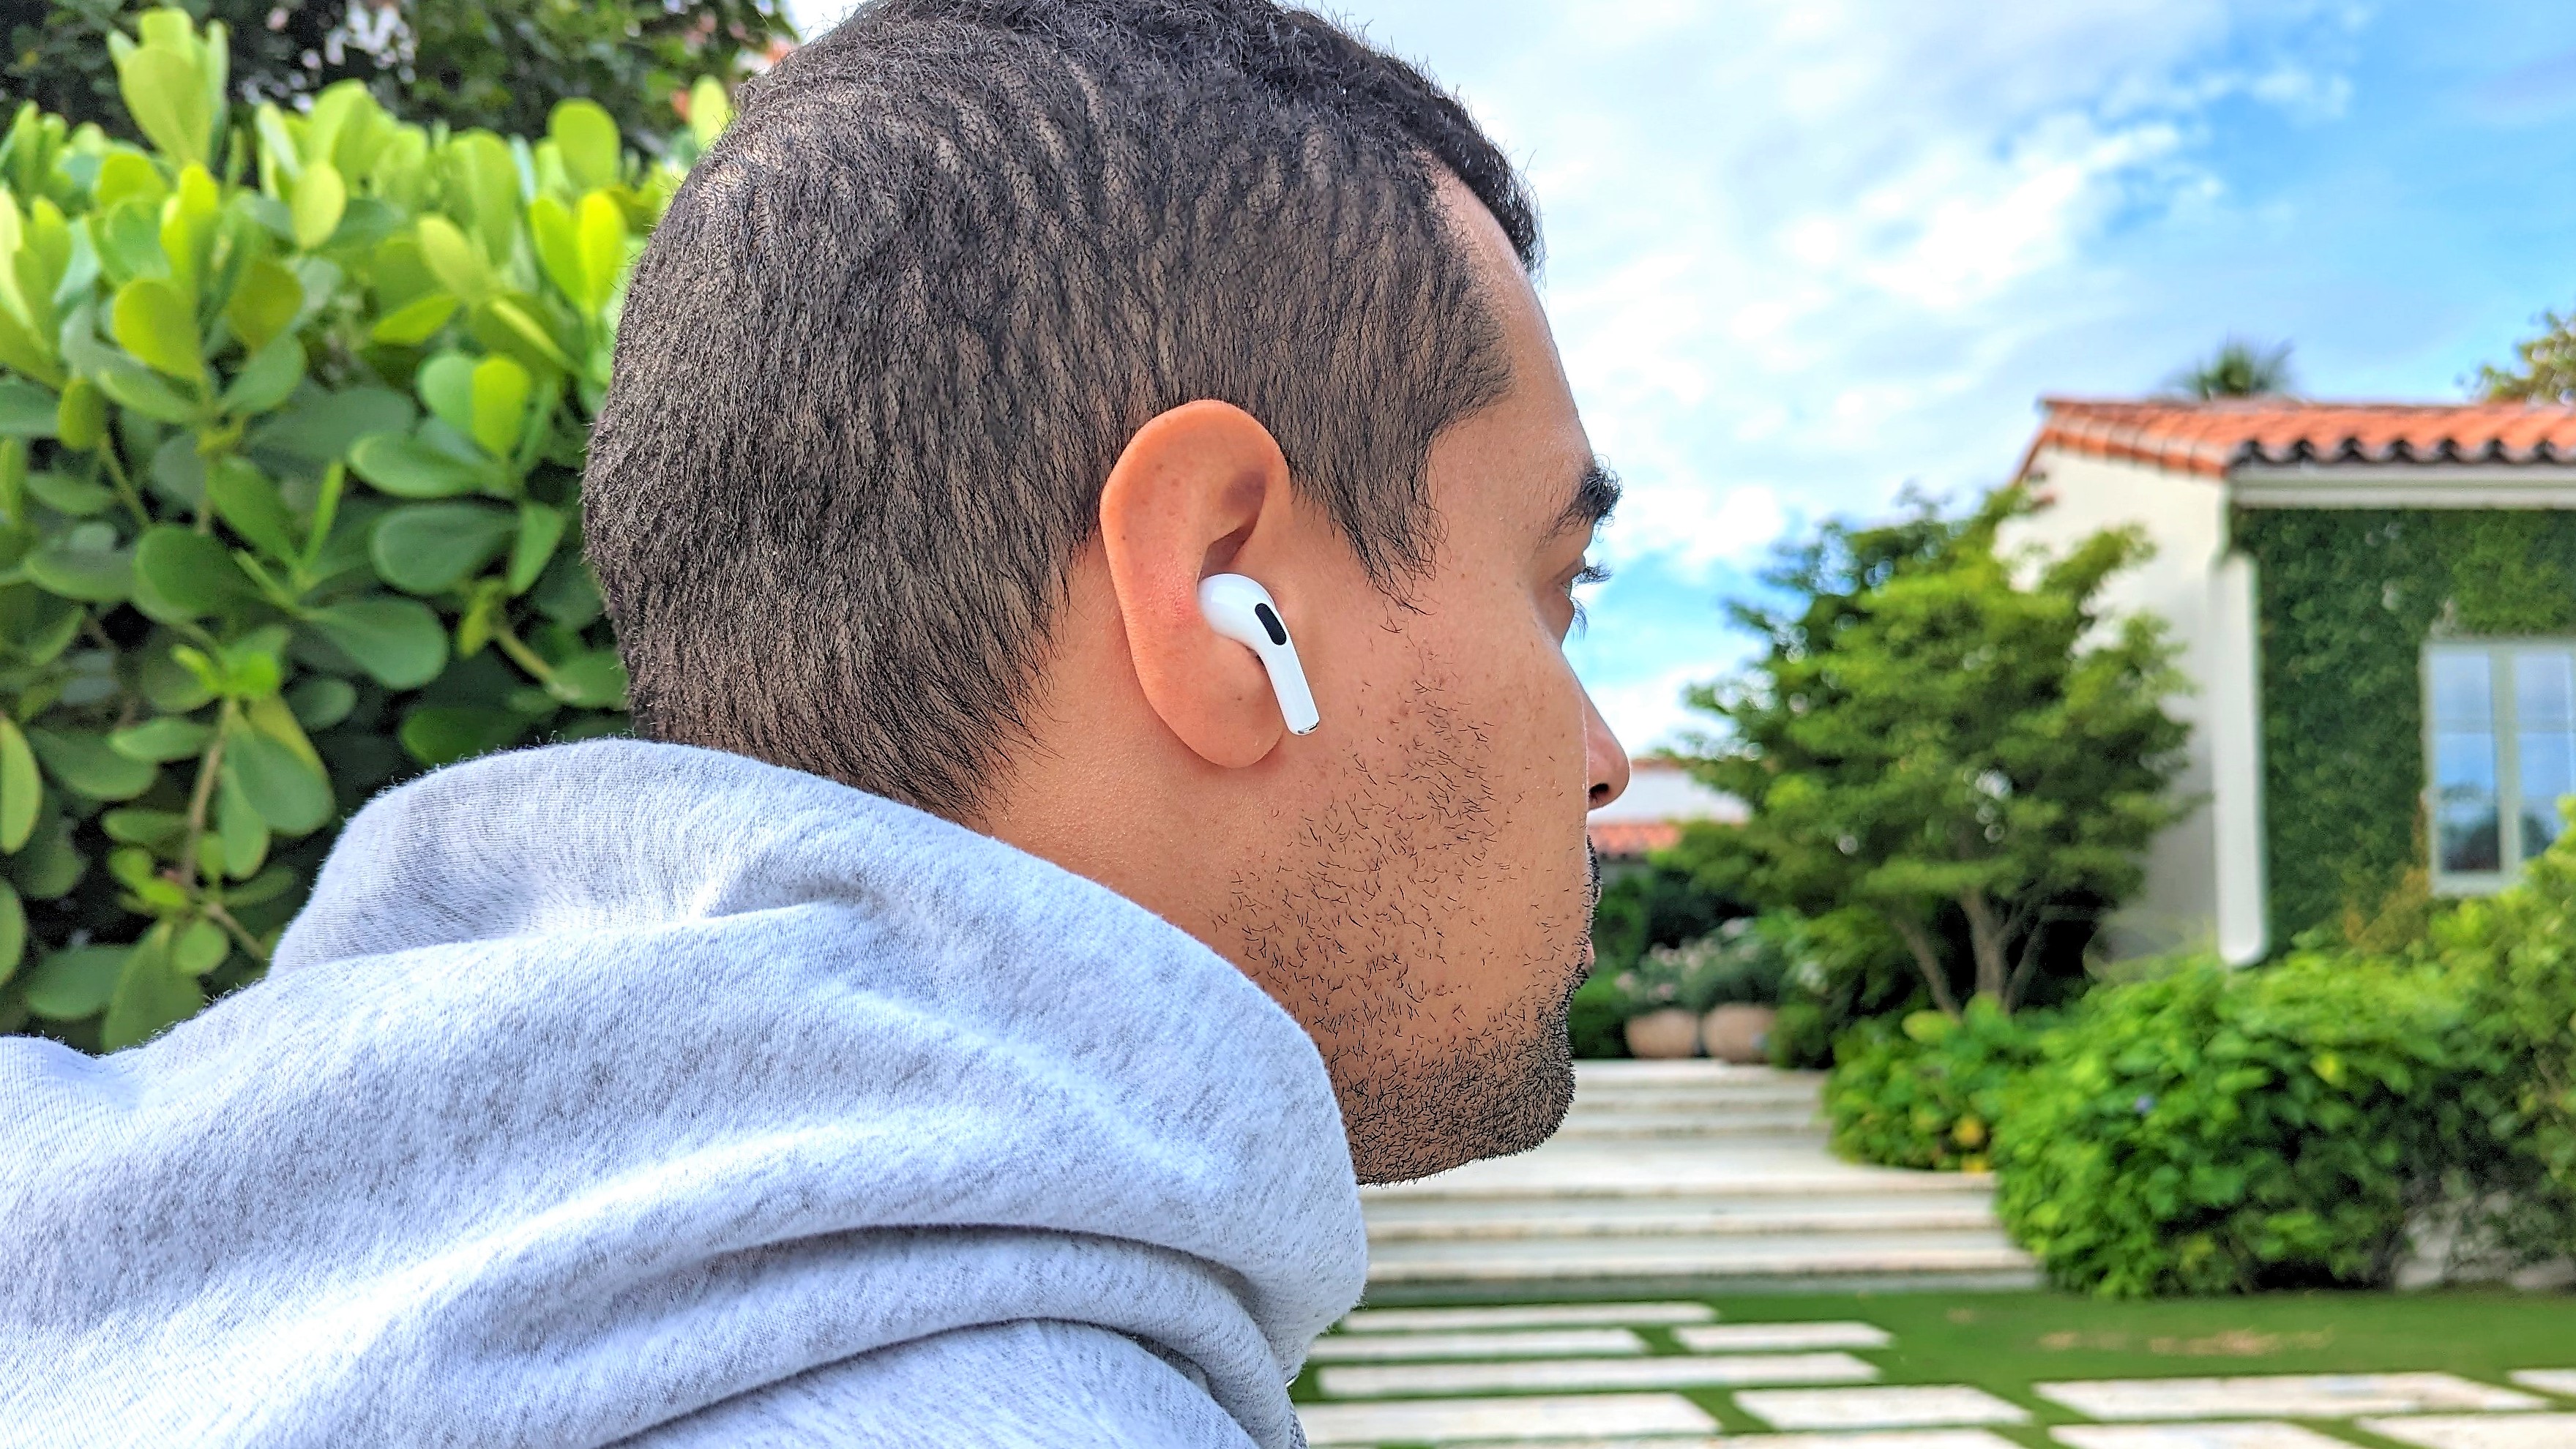 Our reviewer running with the AirPods Pro 2